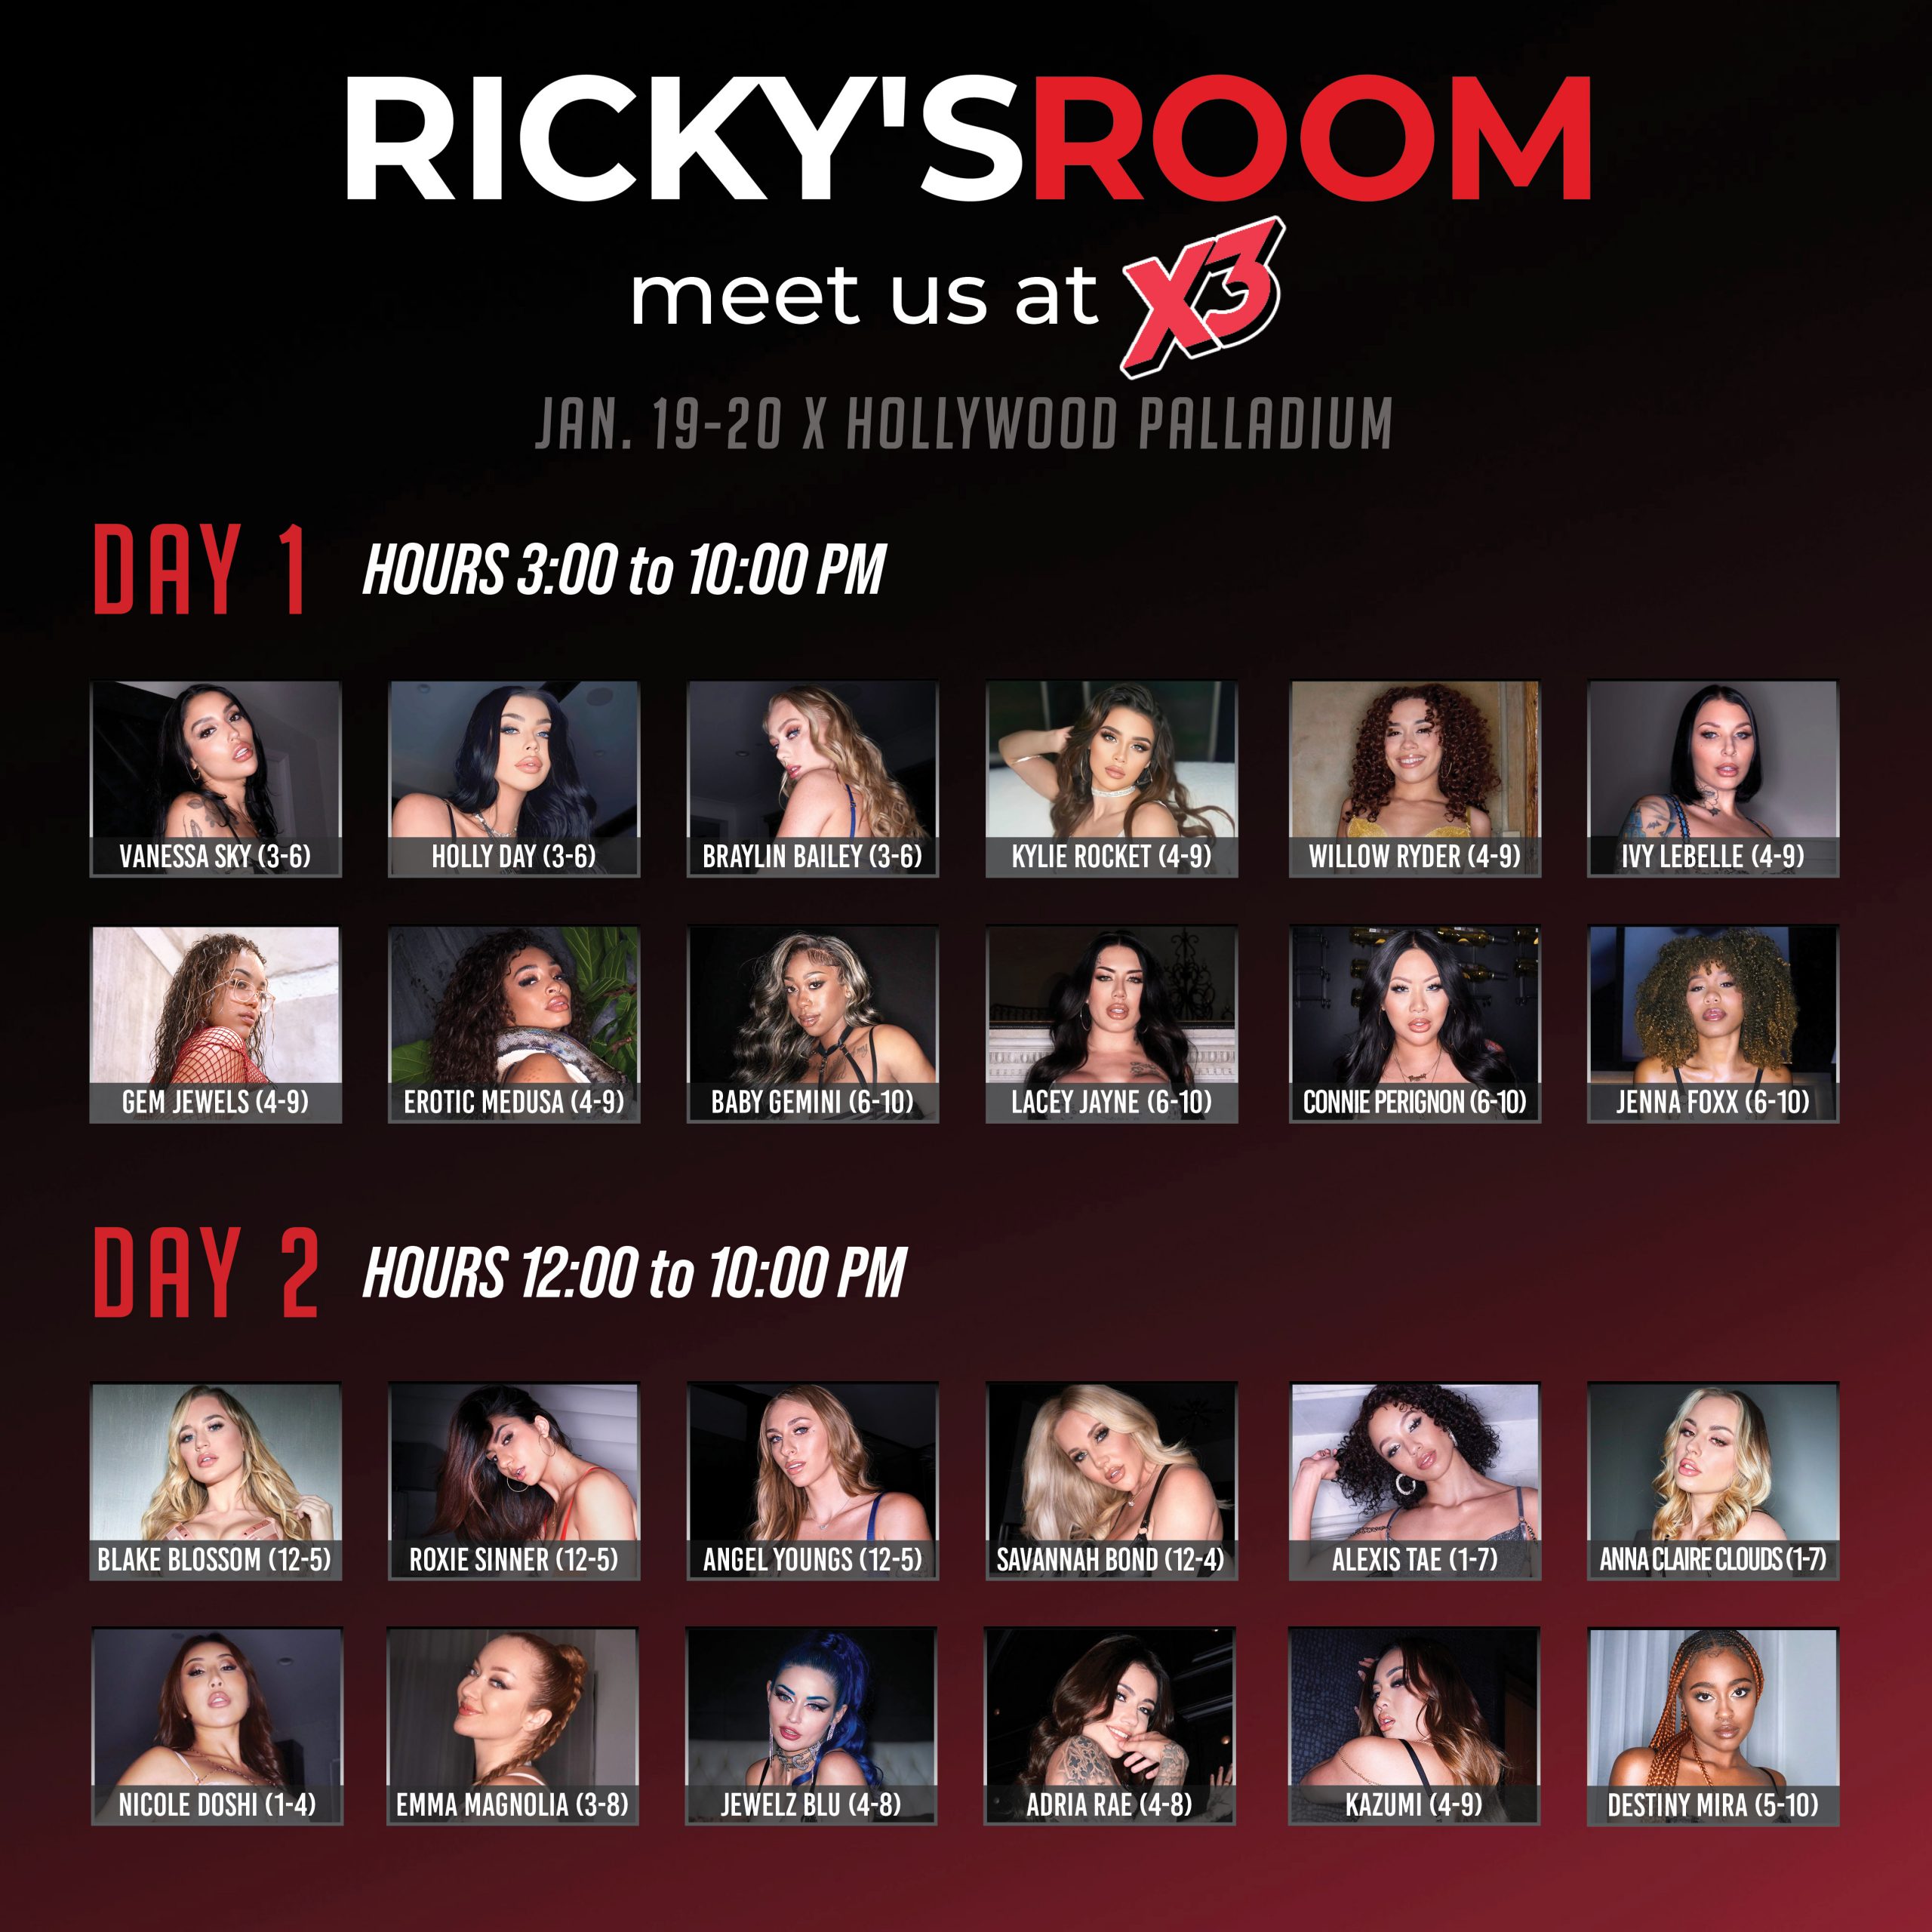 Ricky’s Room Bringing Bevy of All-Star Beauties to X3 Show